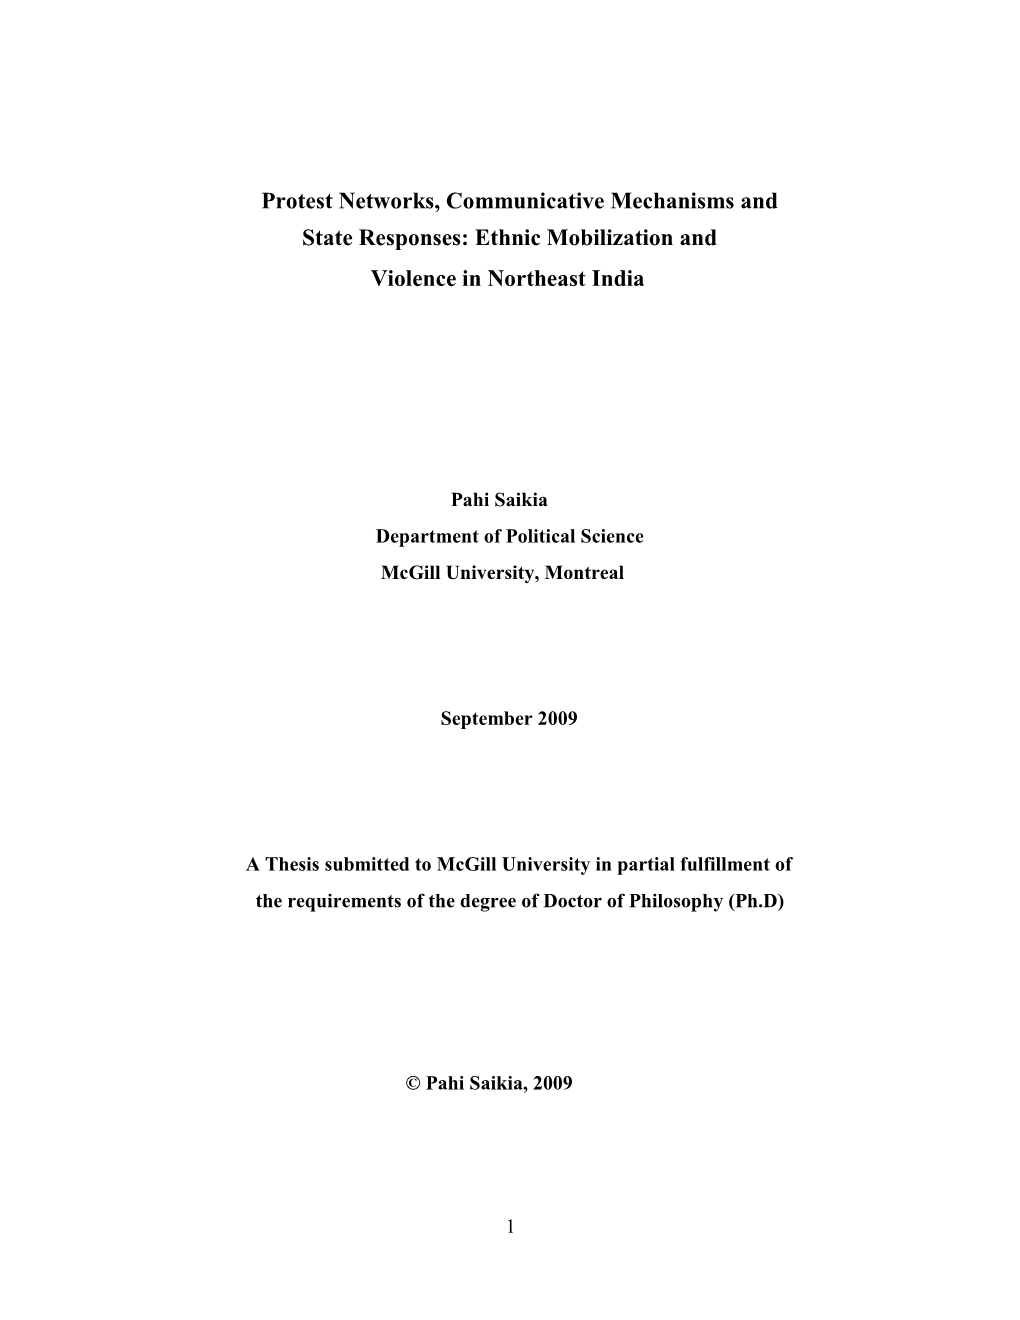 Protest Networks, Communicative Mechanisms and State Responses: Ethnic Mobilization and Violence in Northeast India